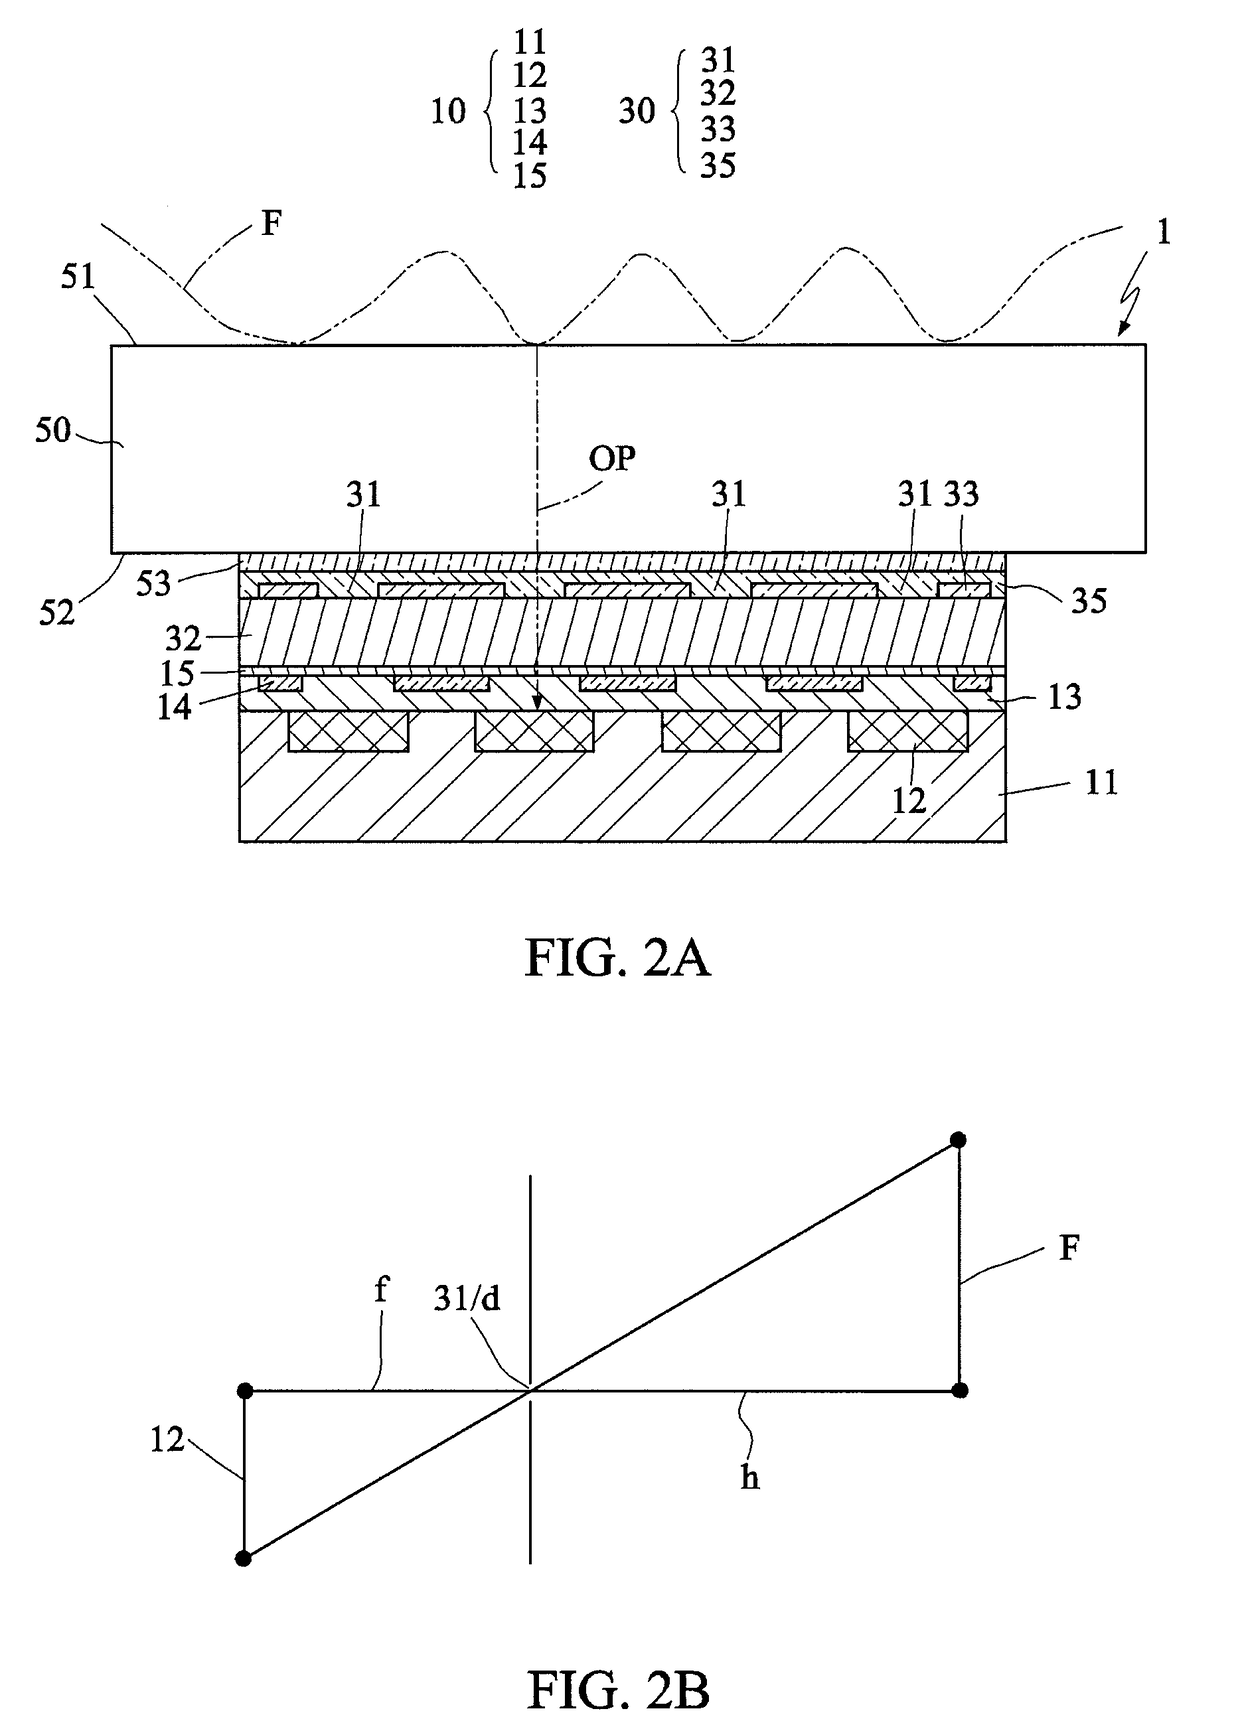 Integrated sensing module, integrated sensing assembly and method of manufacturing the integrated sensing module